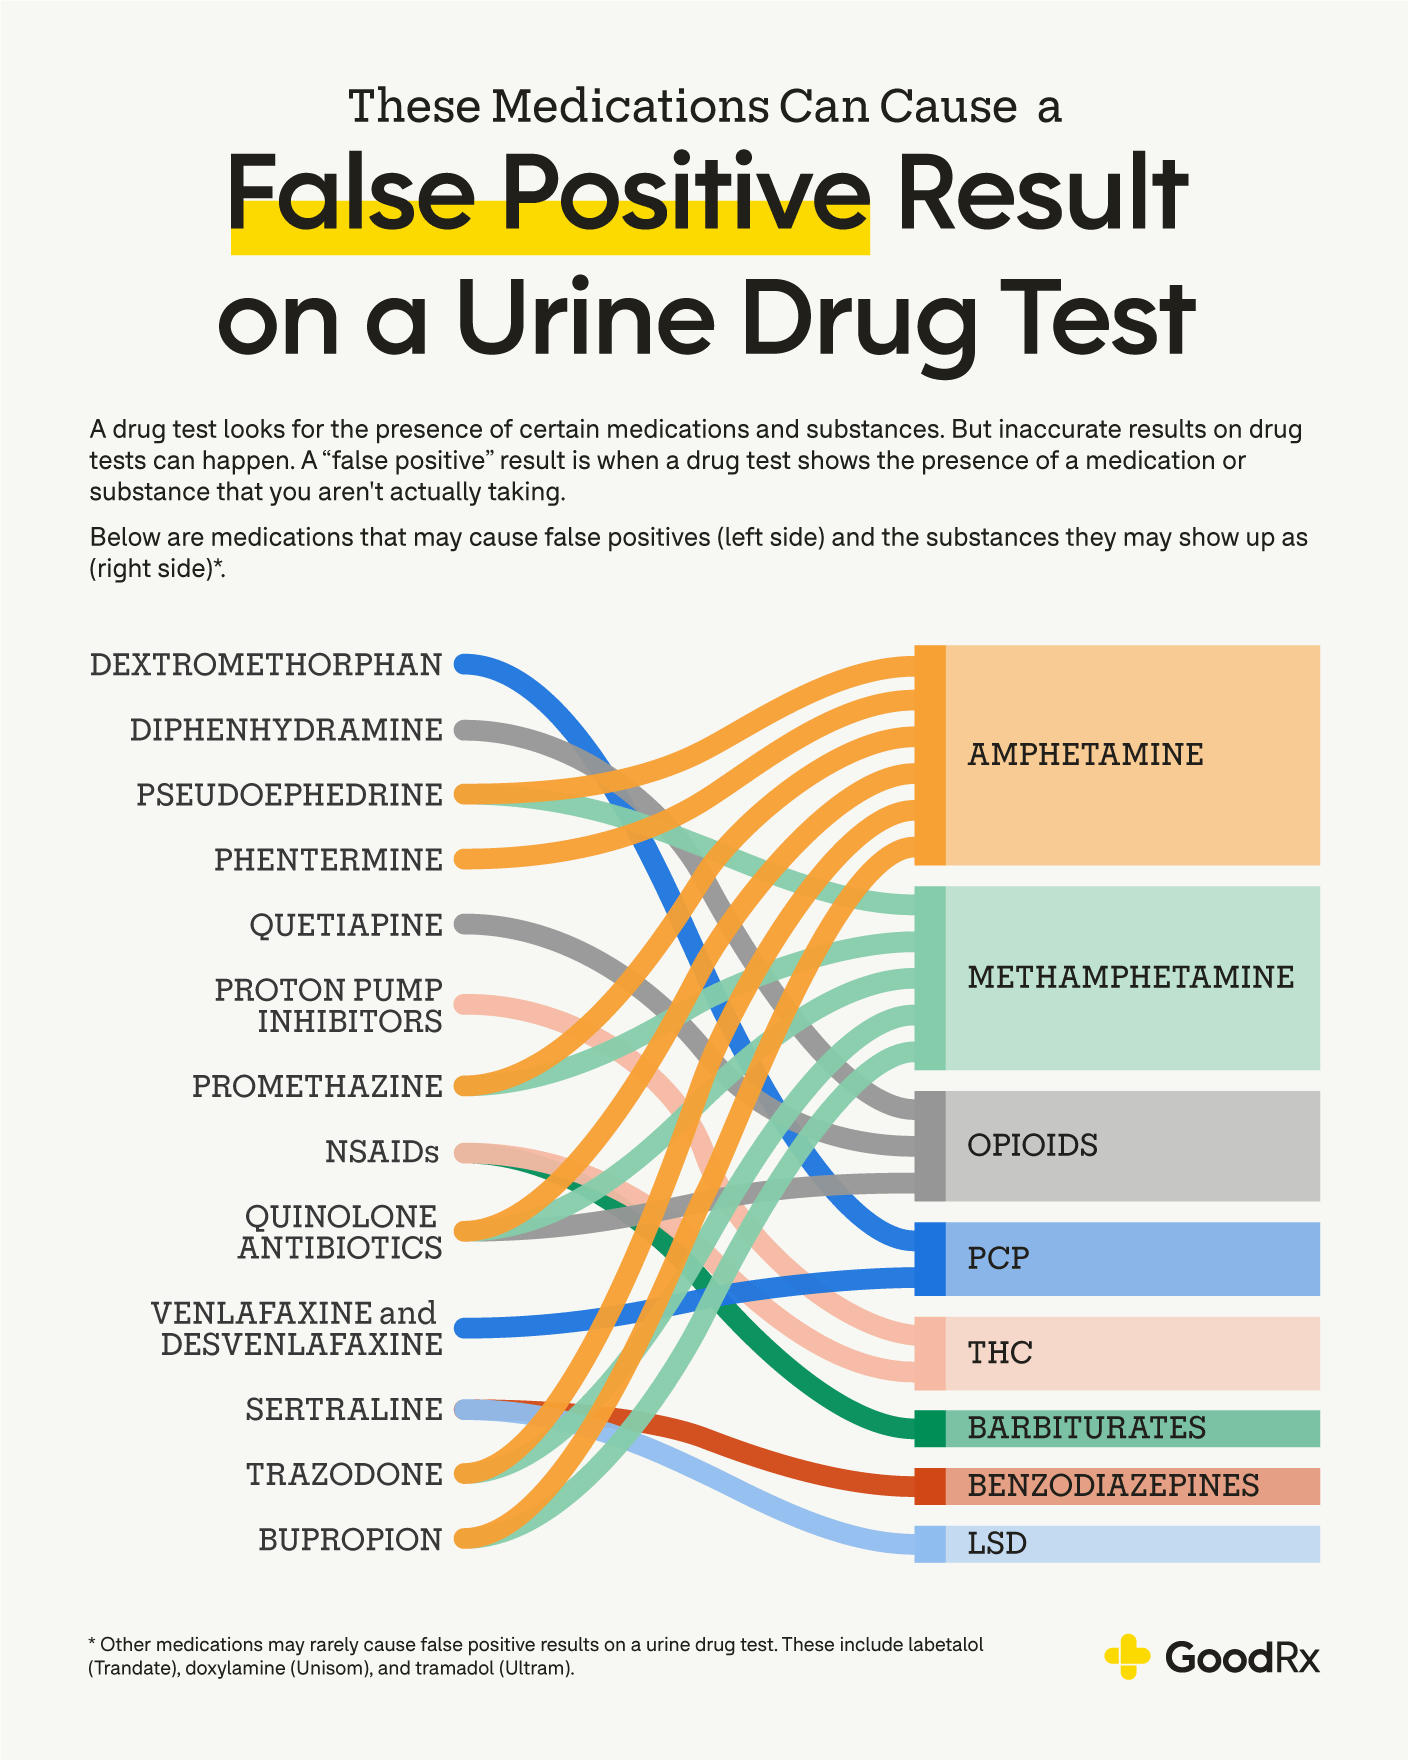 Does Effexor Show Up on a Drug Test?